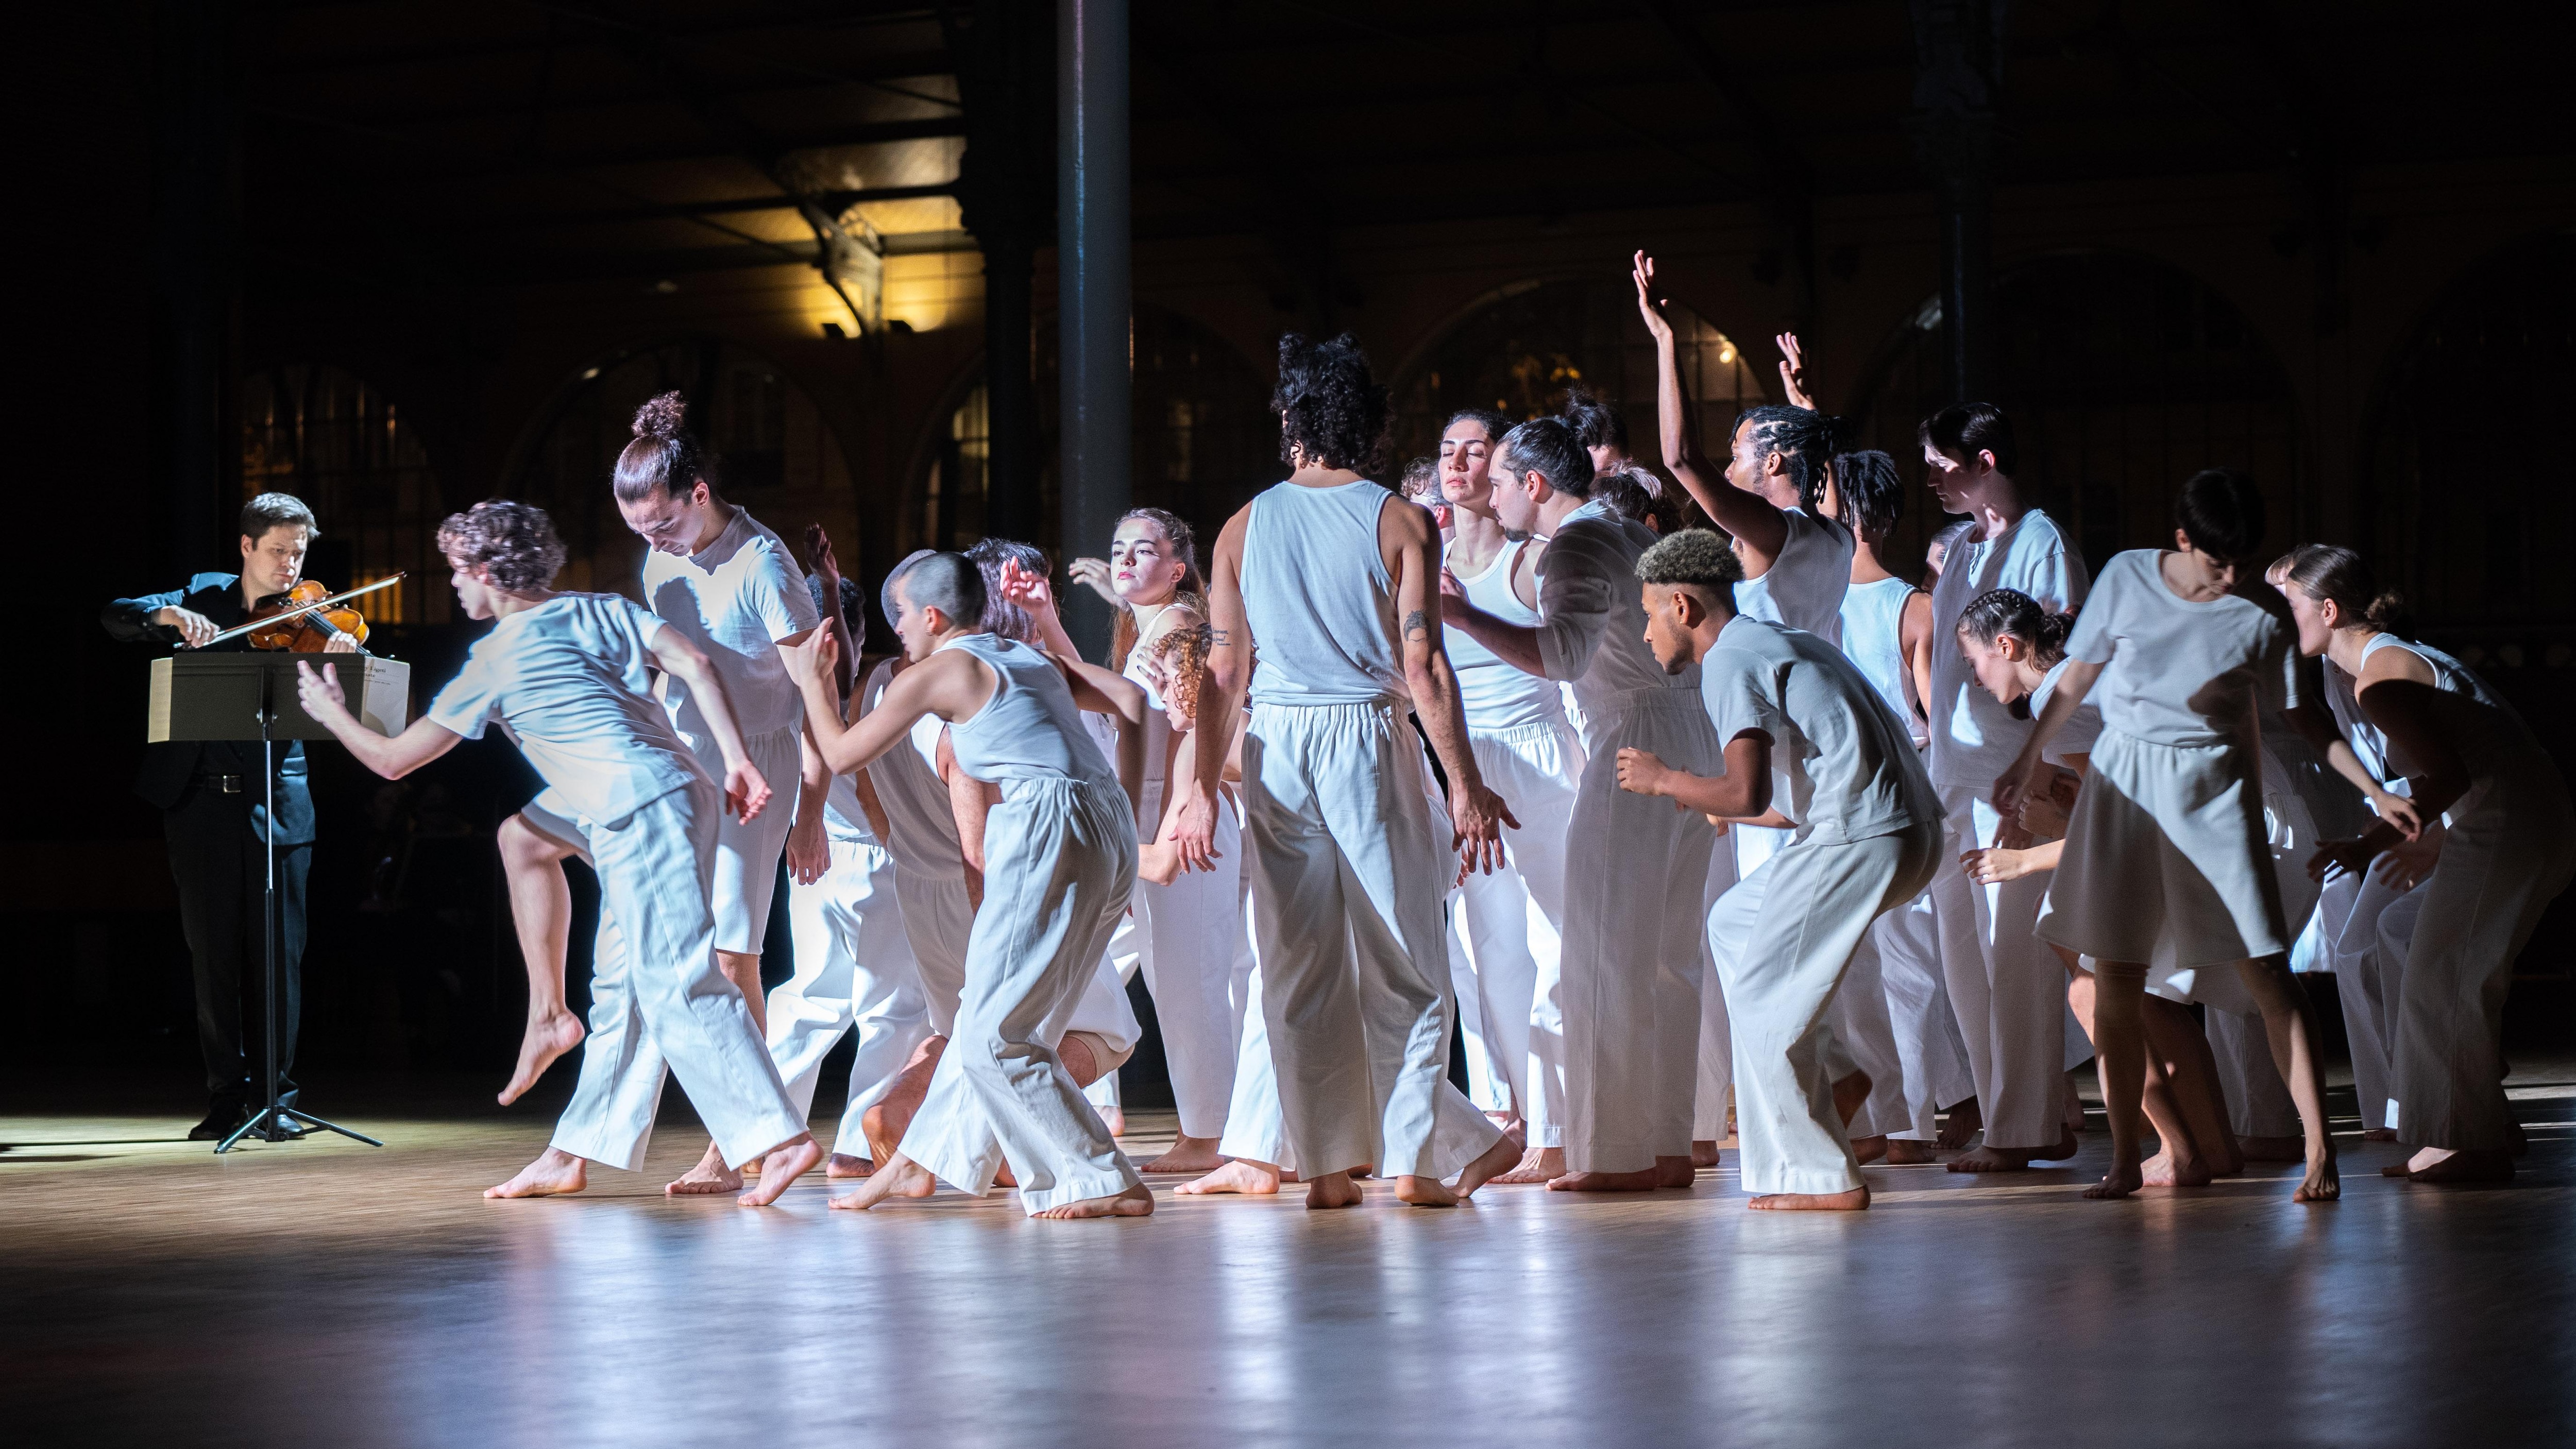 Dancers standing in white clothes, grouped together, making desynchronized movements.  